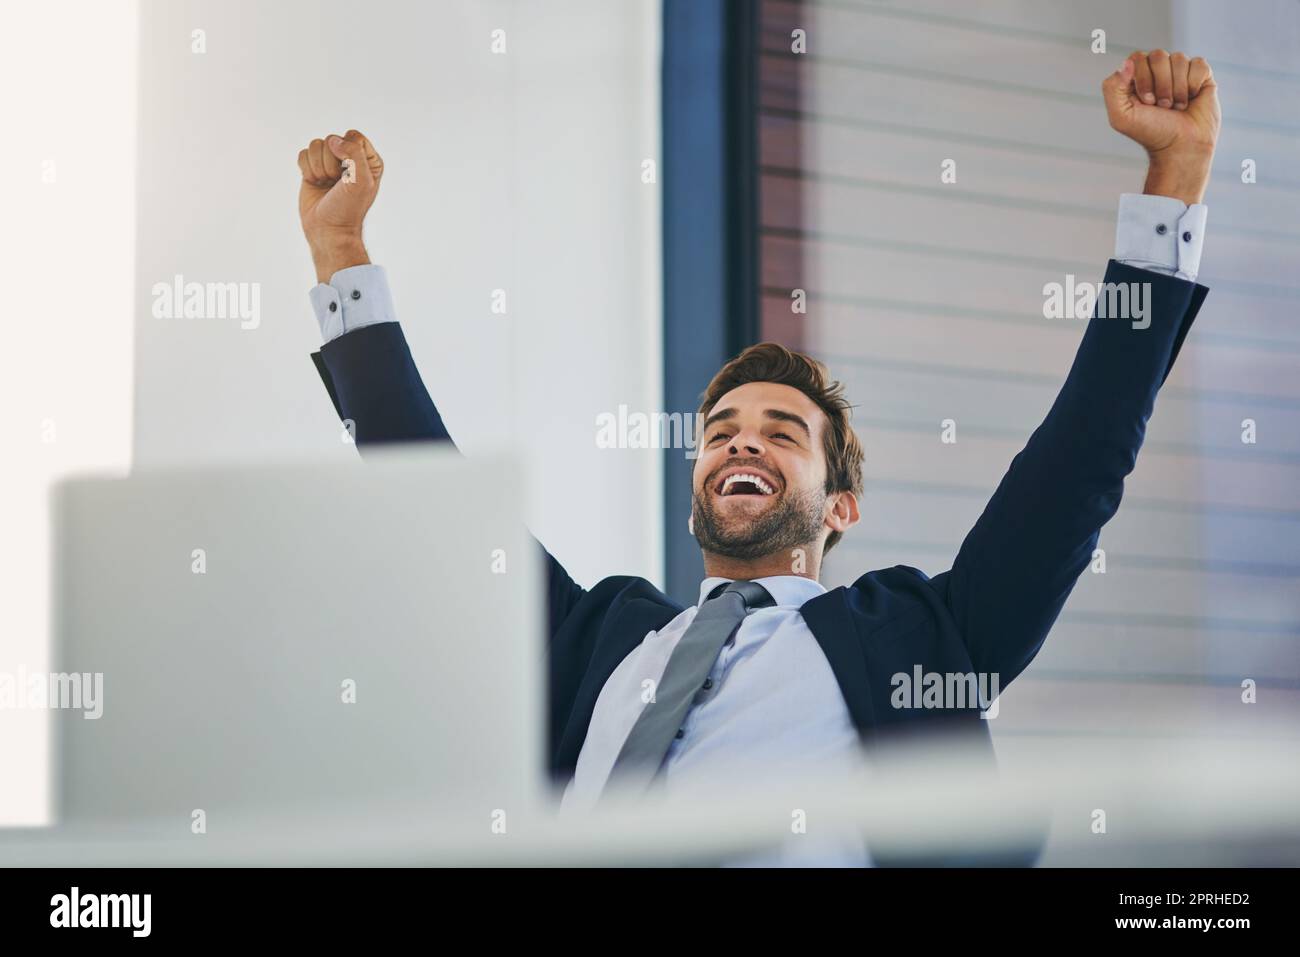 Success has him feeling on top of the world. a young businessman cheering while working in an office. Stock Photo